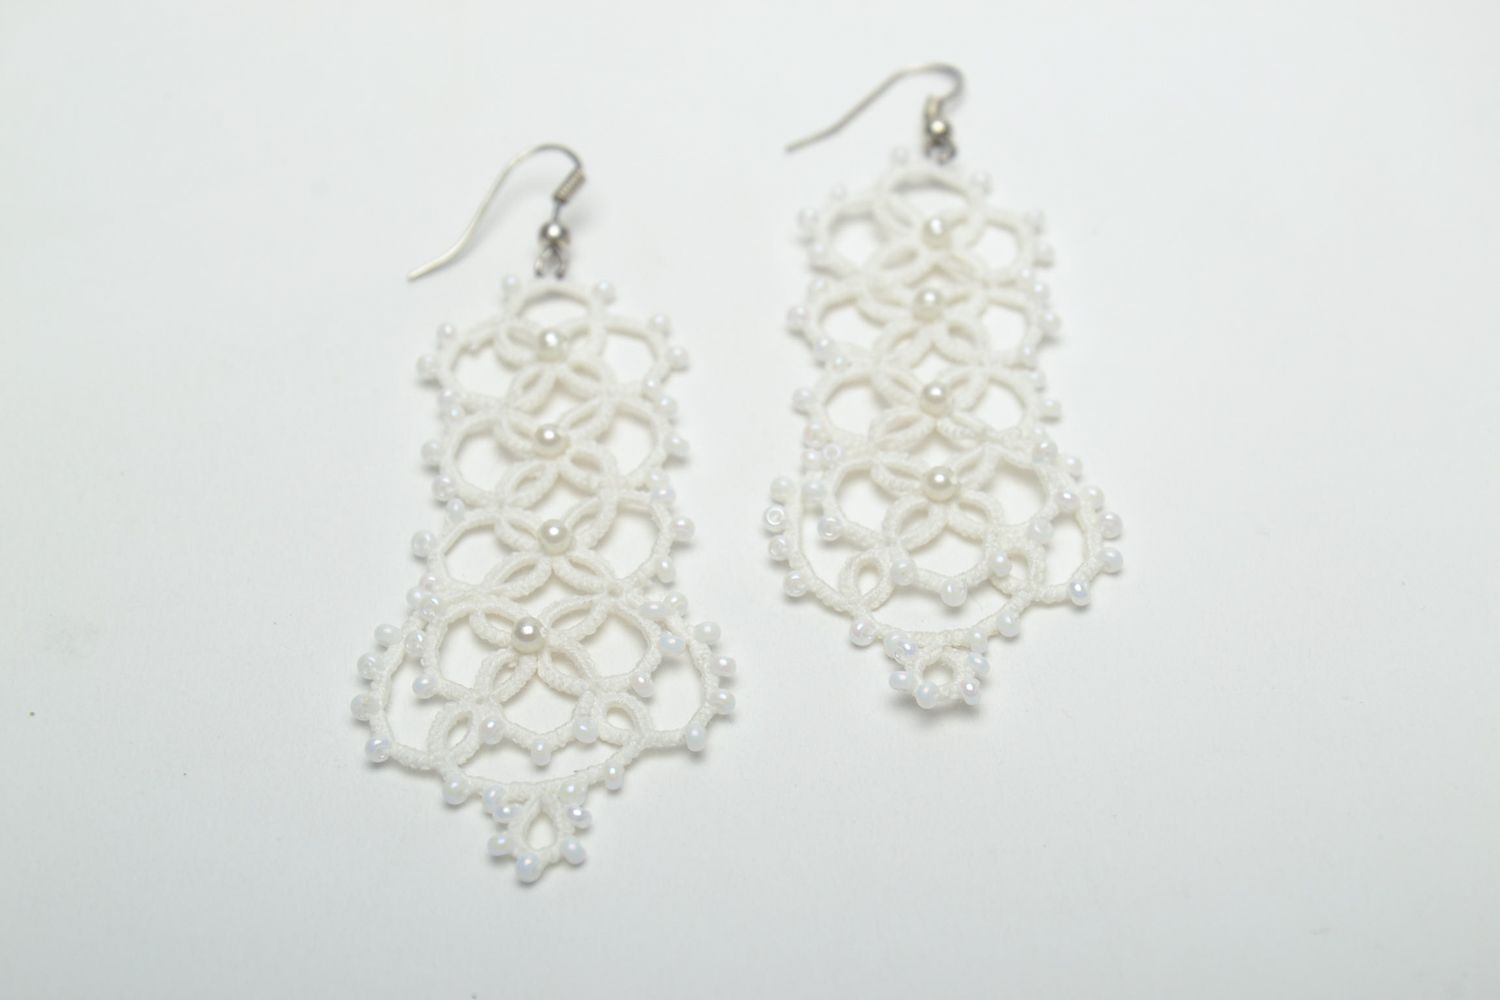 Woven earrings with beads made using tatting technique photo 2